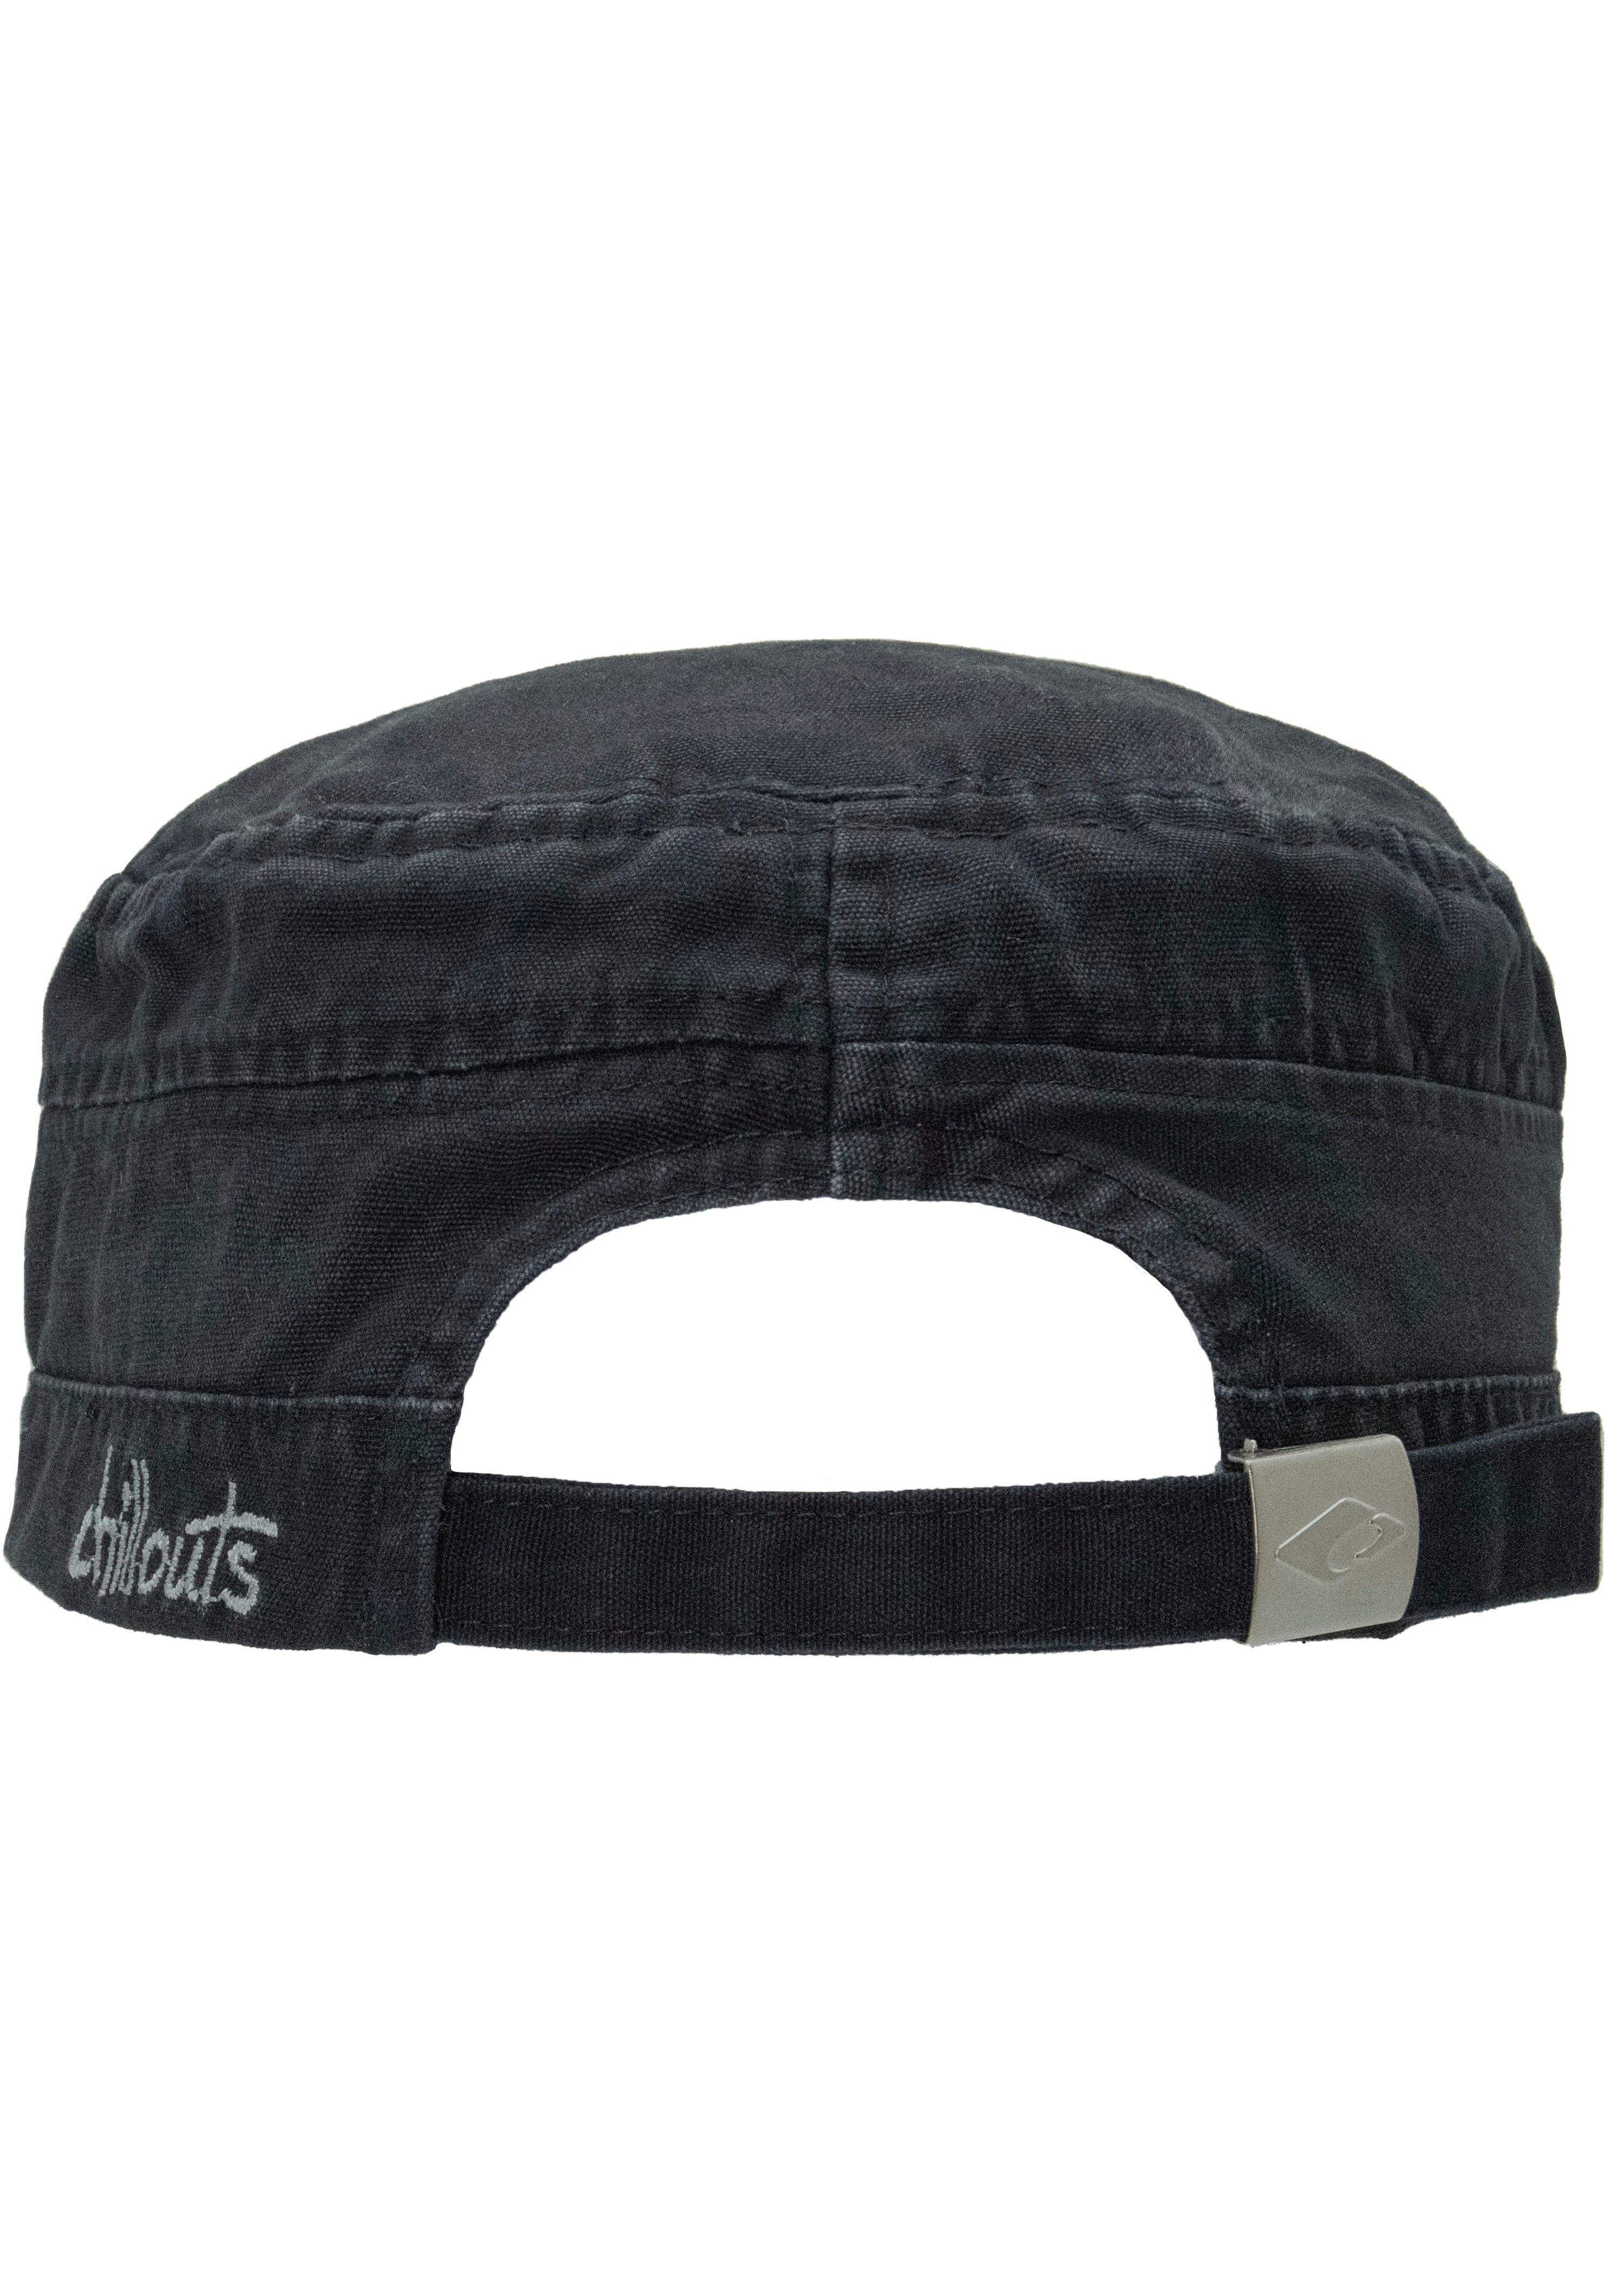 reiner Army washed Paso navy Size El Hat atmungsaktiv, chillouts Cap Baumwolle, aus One